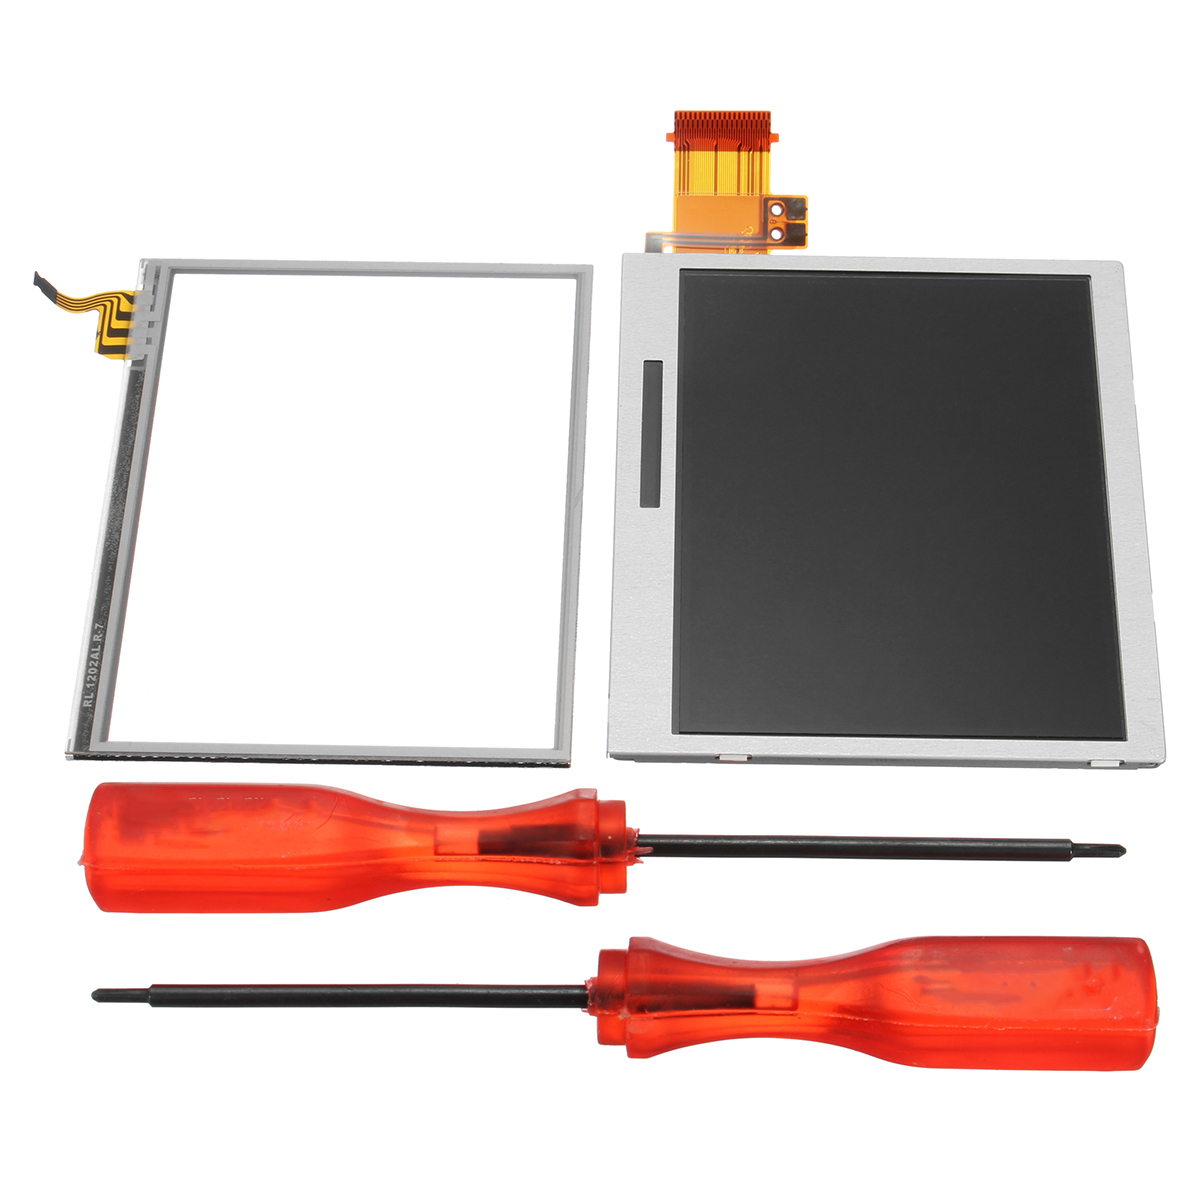 Bottom LCD Display Touch Screen Replacement Tool For Nintendo DS Lite DSL NDSL 7